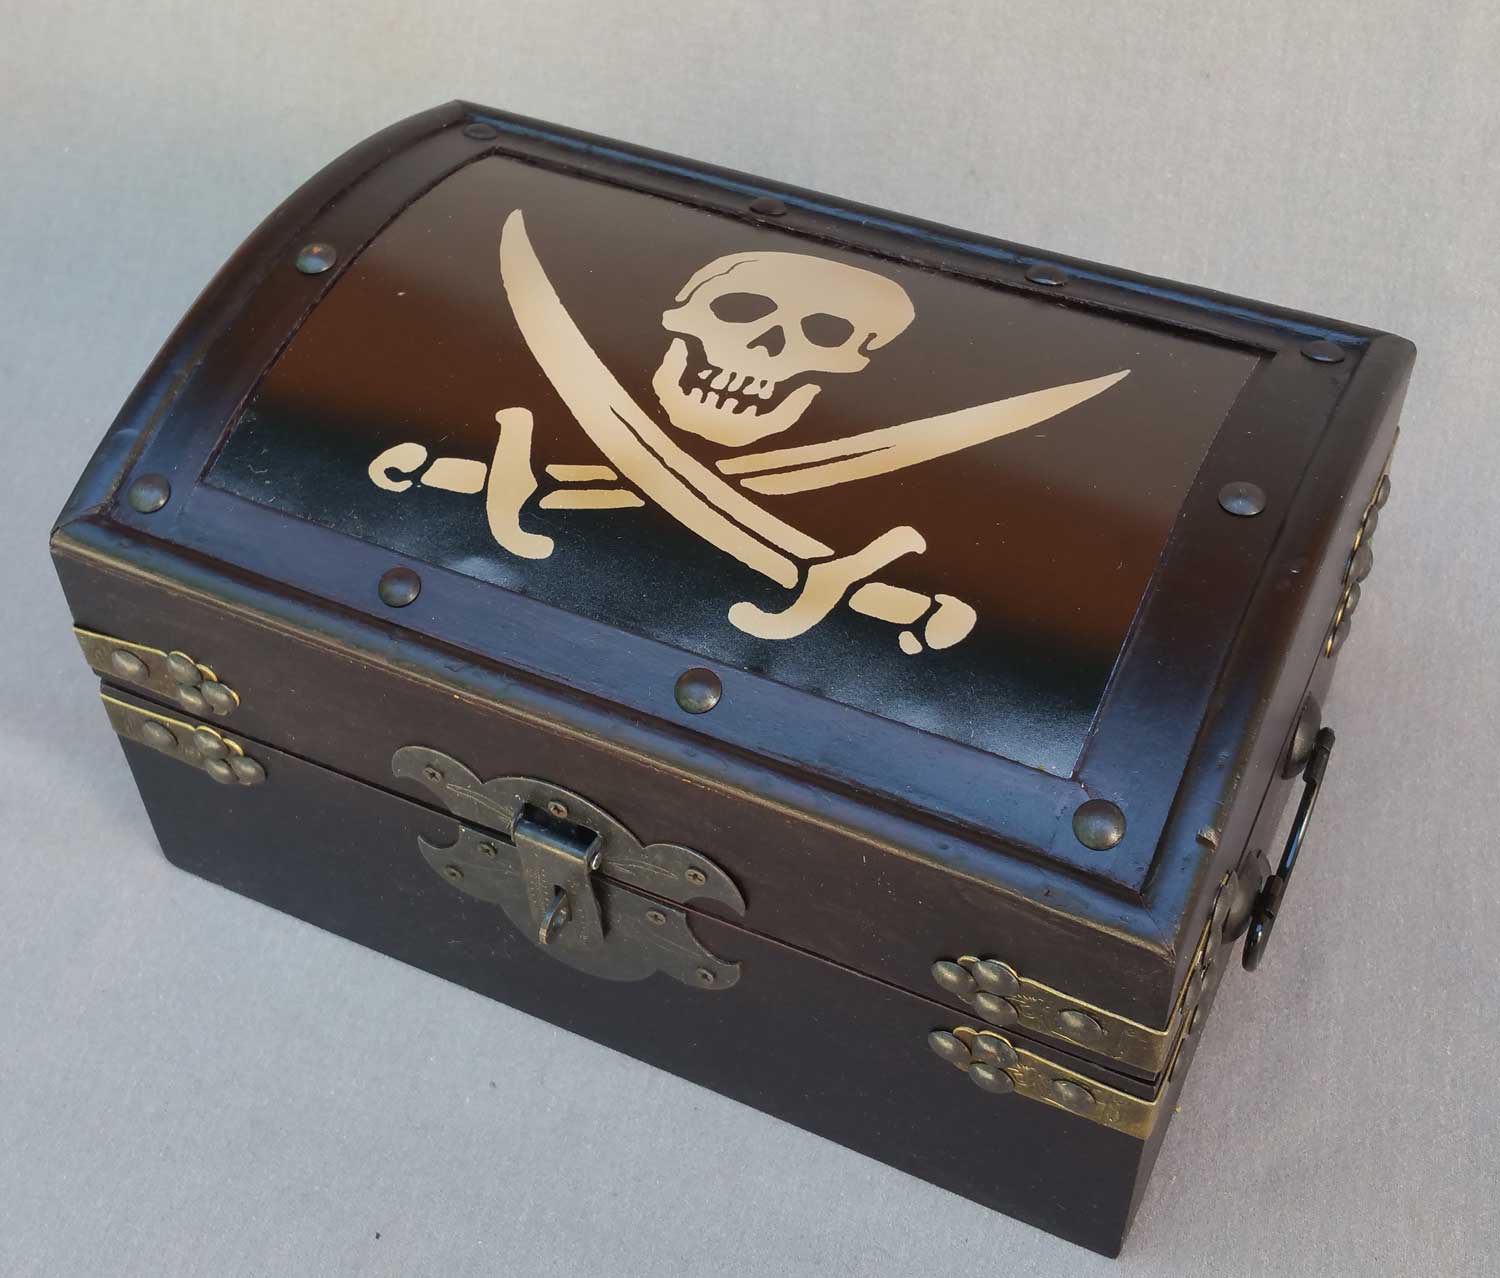 Pirate Chest with Cptn Jack Rackham's Flag - Click Image to Close